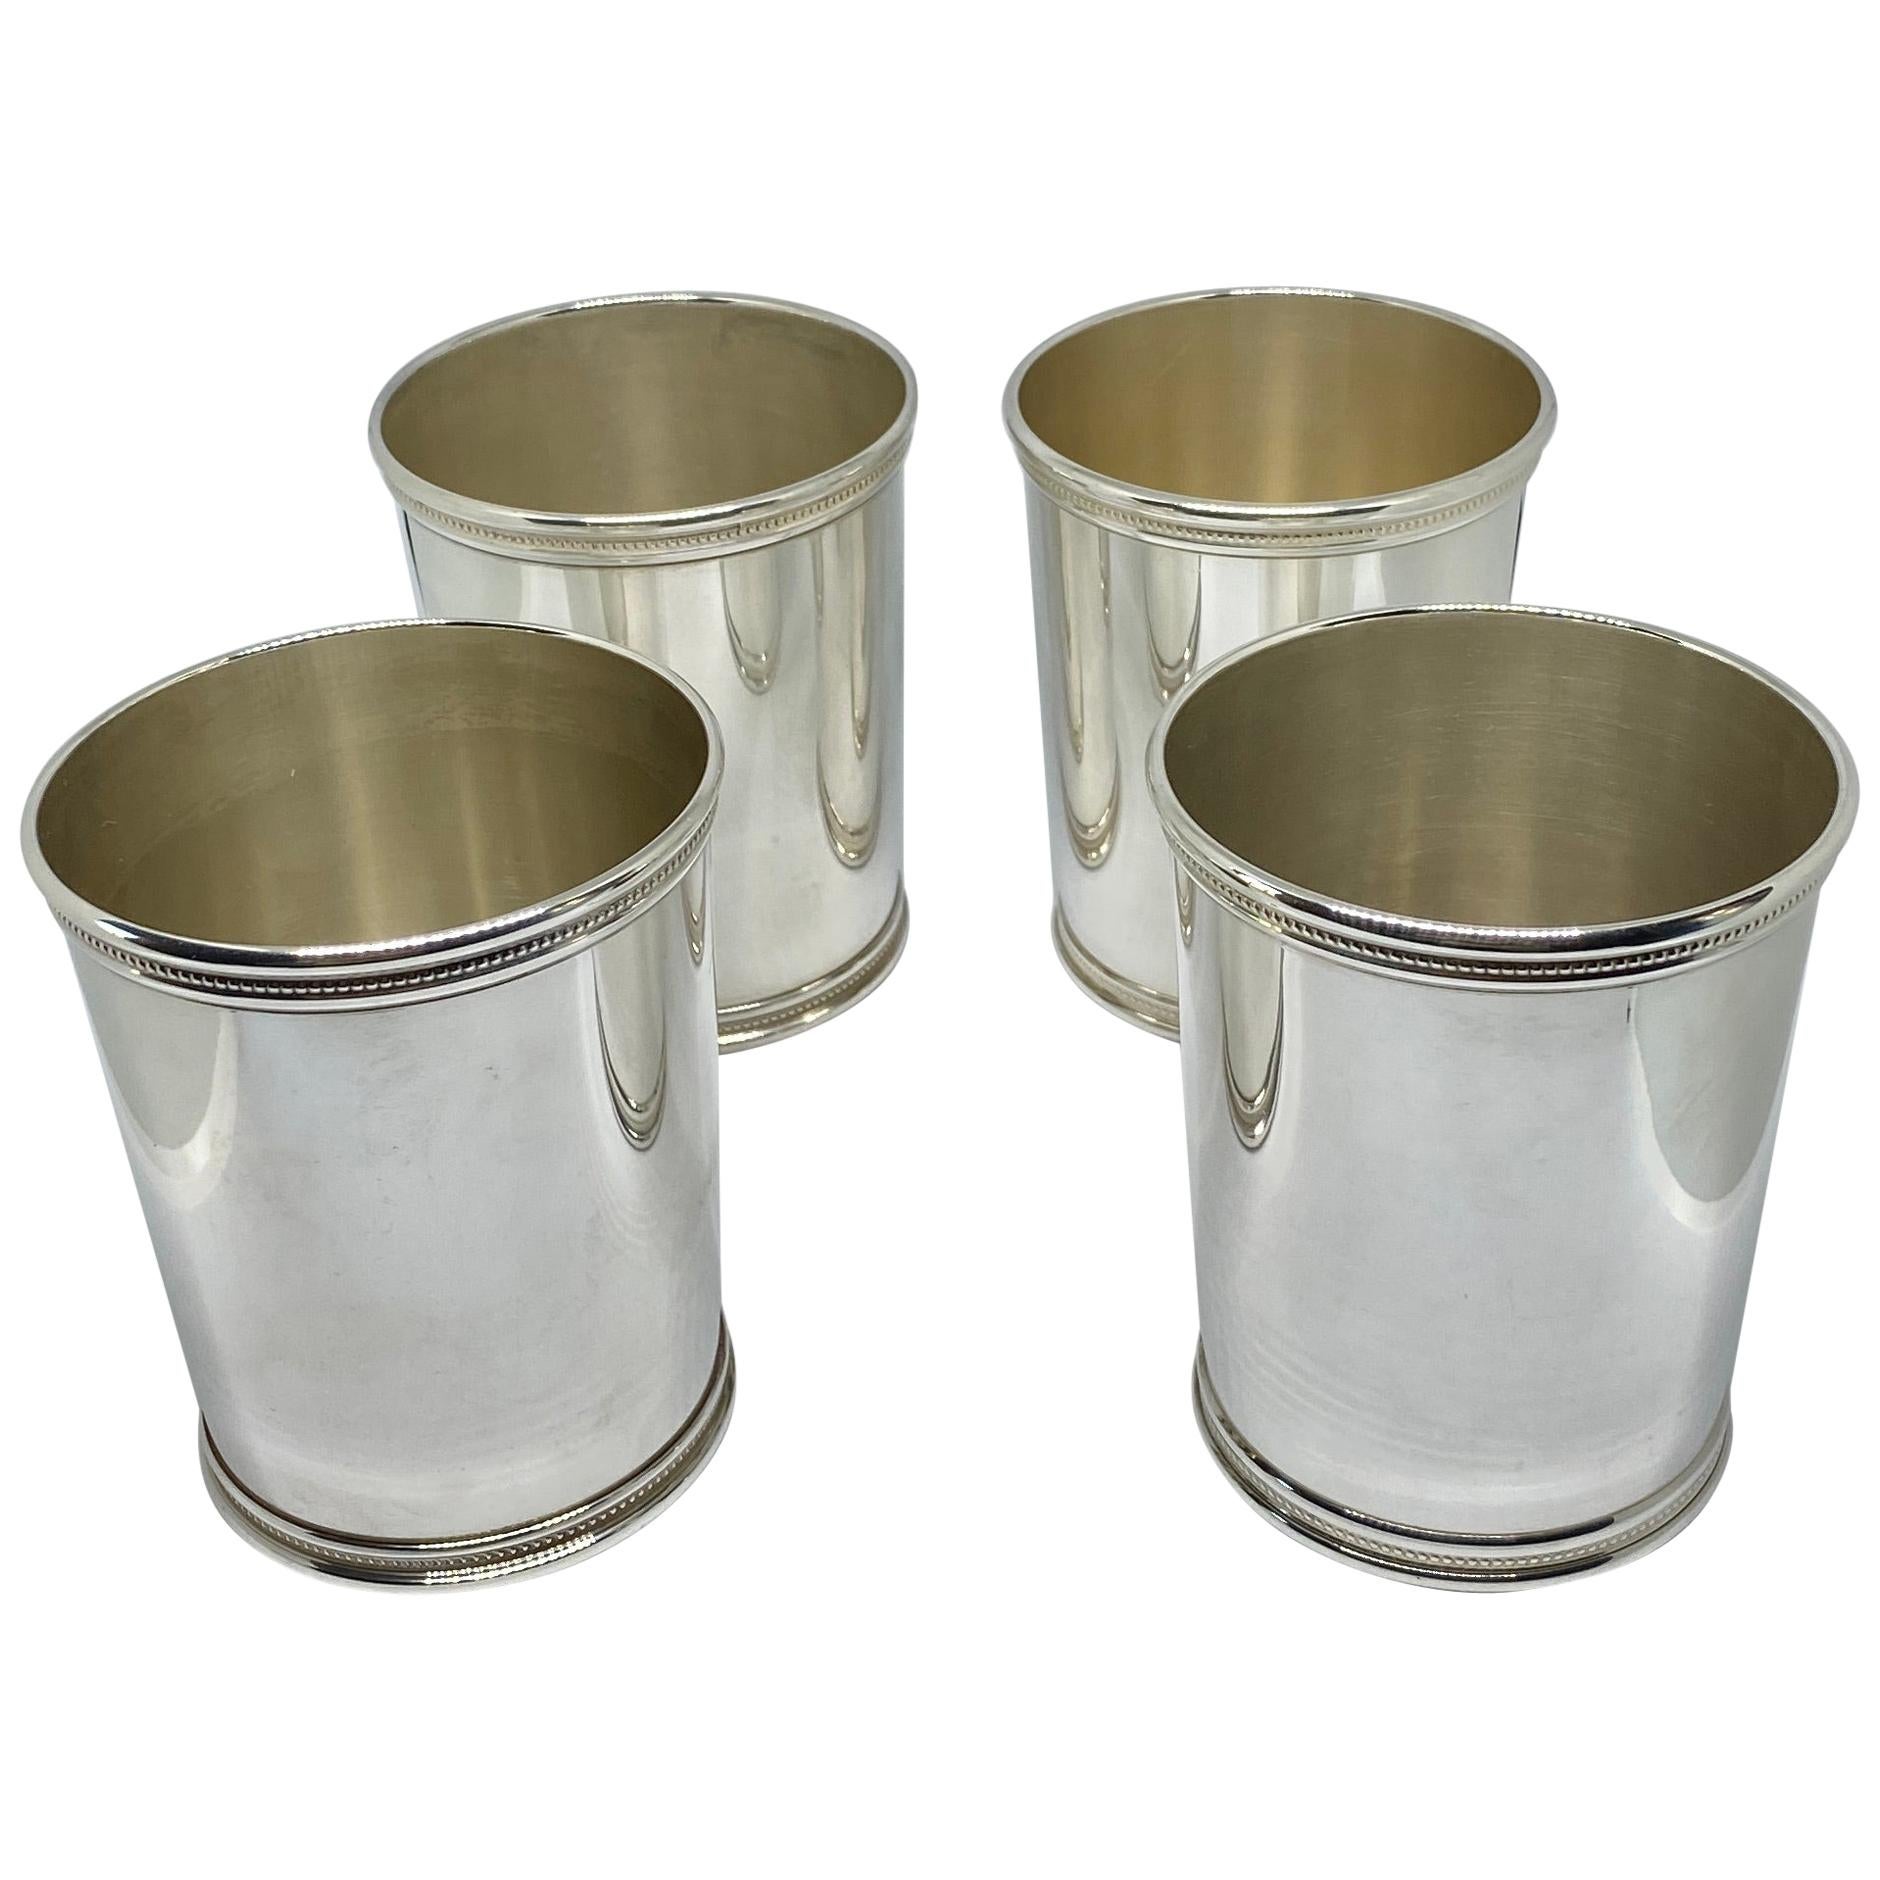 Set of 4 Sterling Julep Cups by Benjamin Trees of Lexington, Kentucky